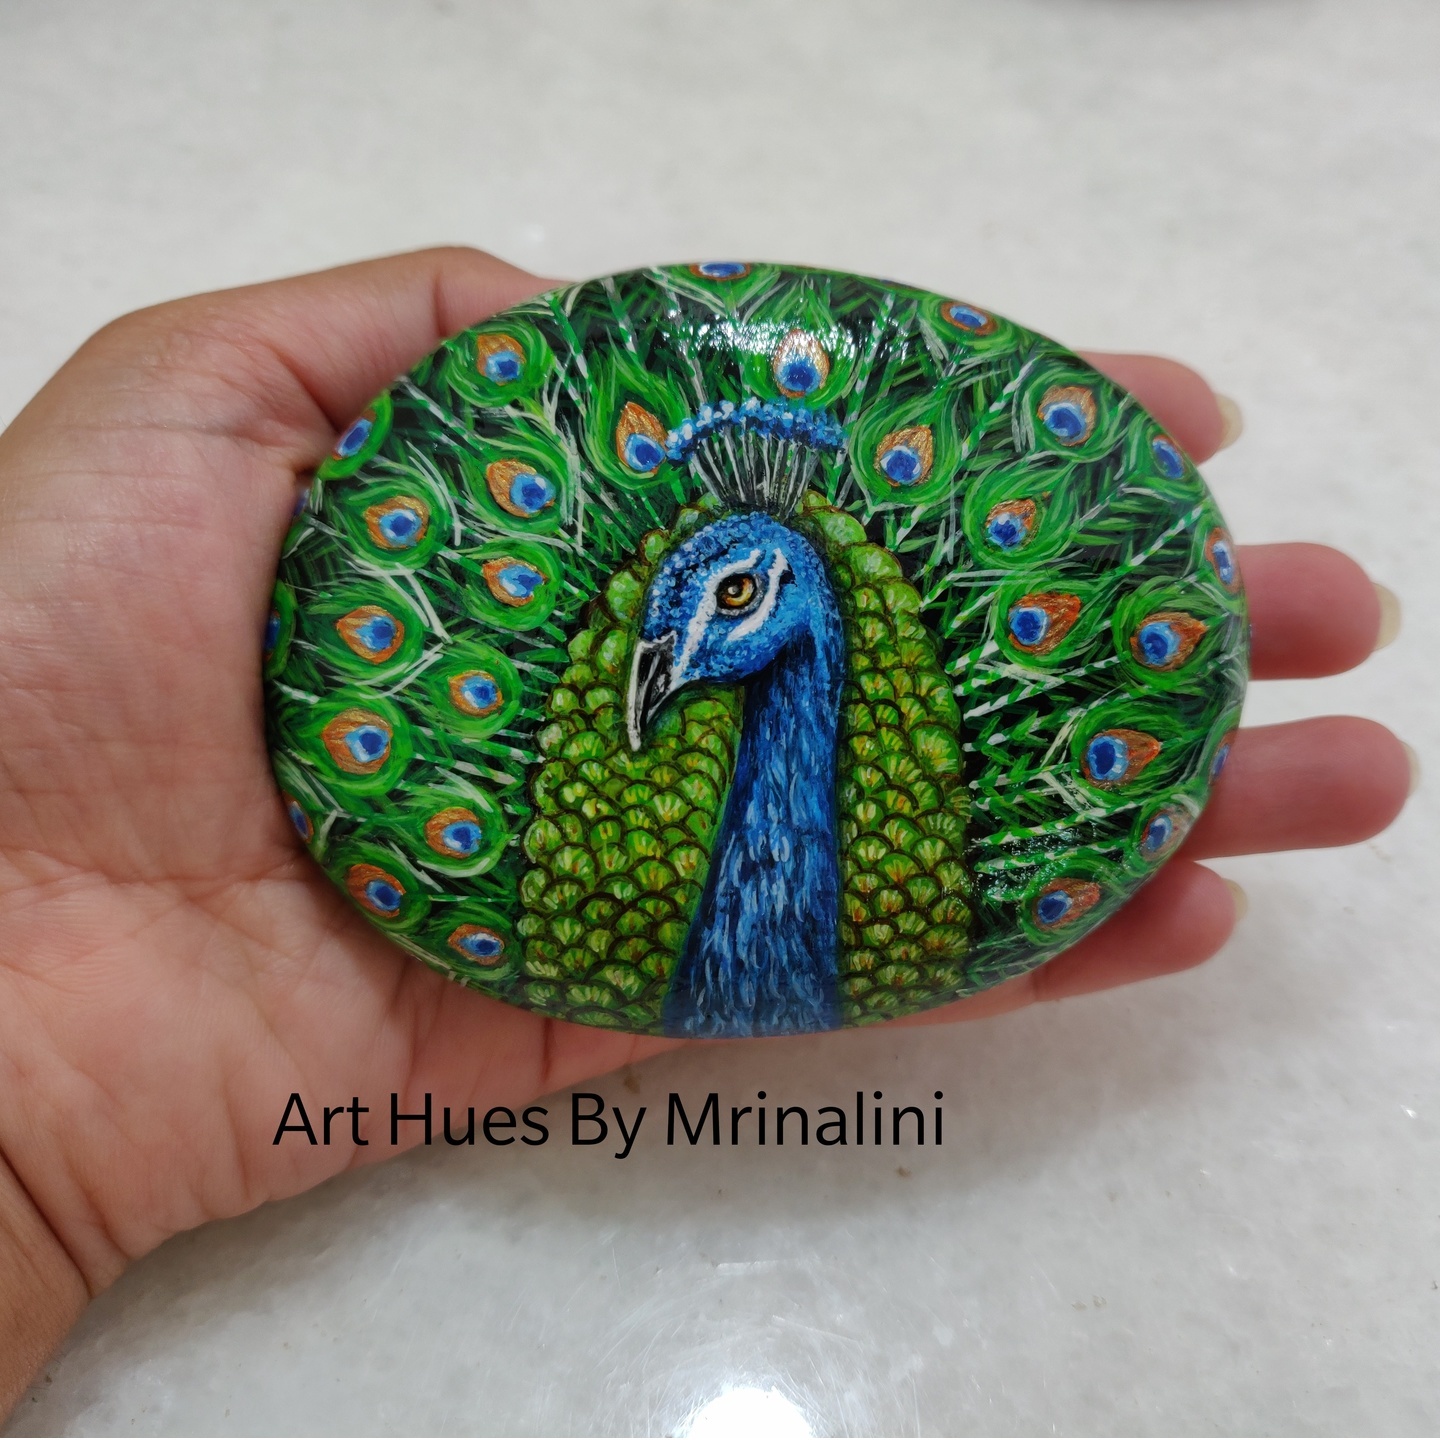 Dancing Peacock hand painted on a rock, unique gift for nature lovers